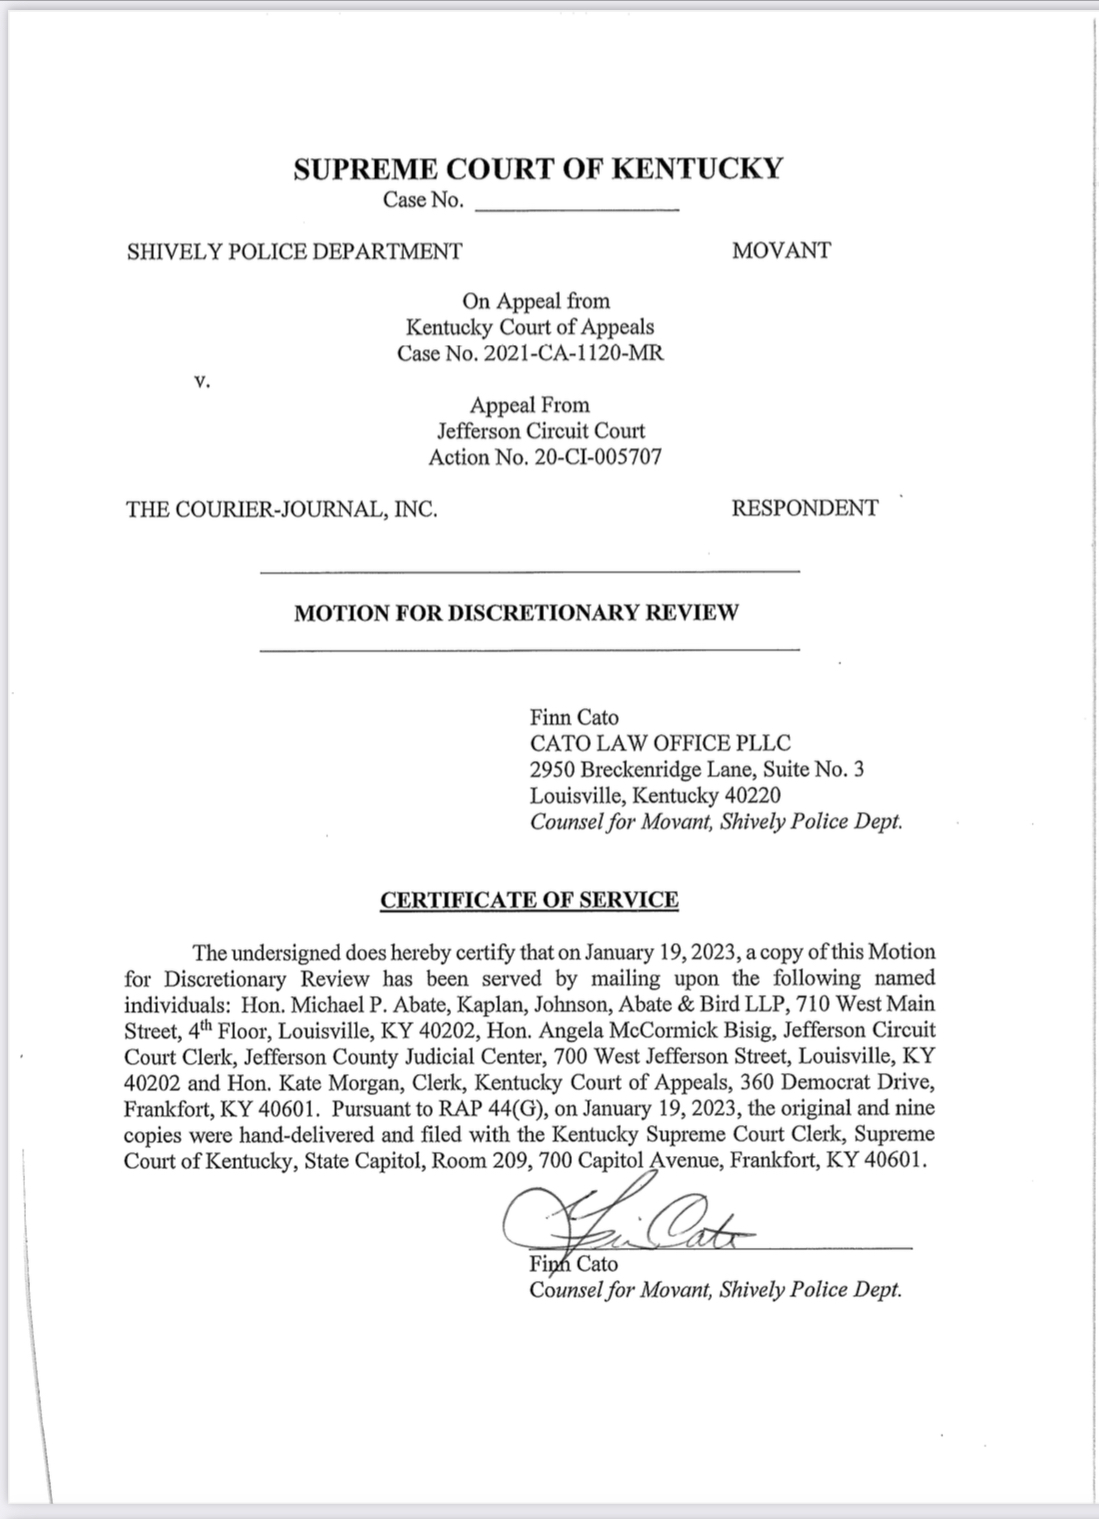 Shively Police Department’s Petition for Discretionary Review